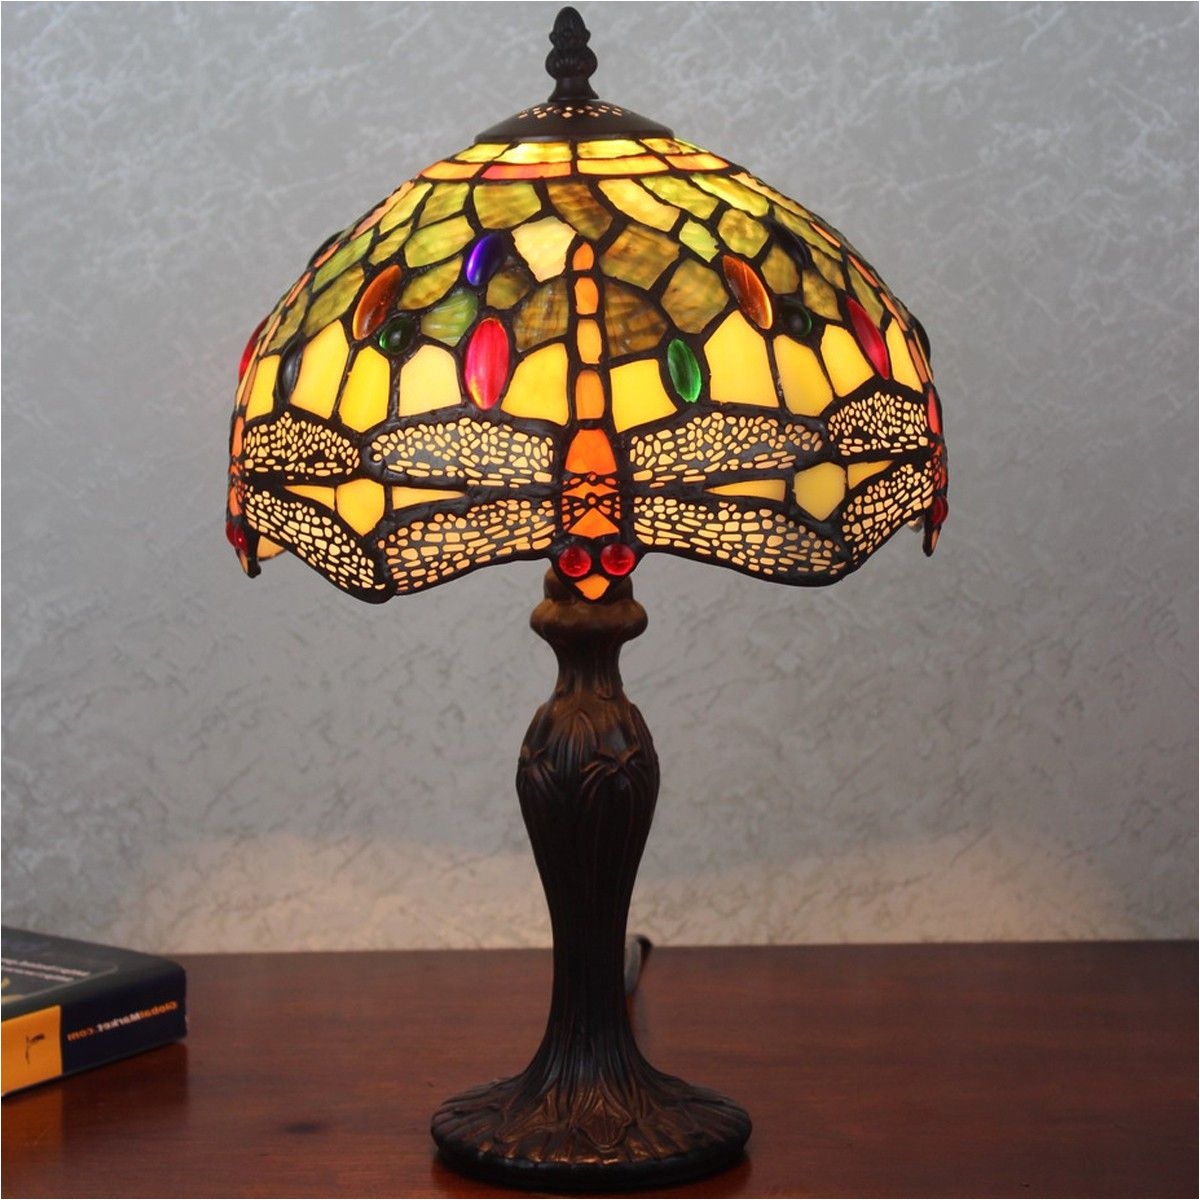 recolor your life with best in glass dale tiffany table lamps